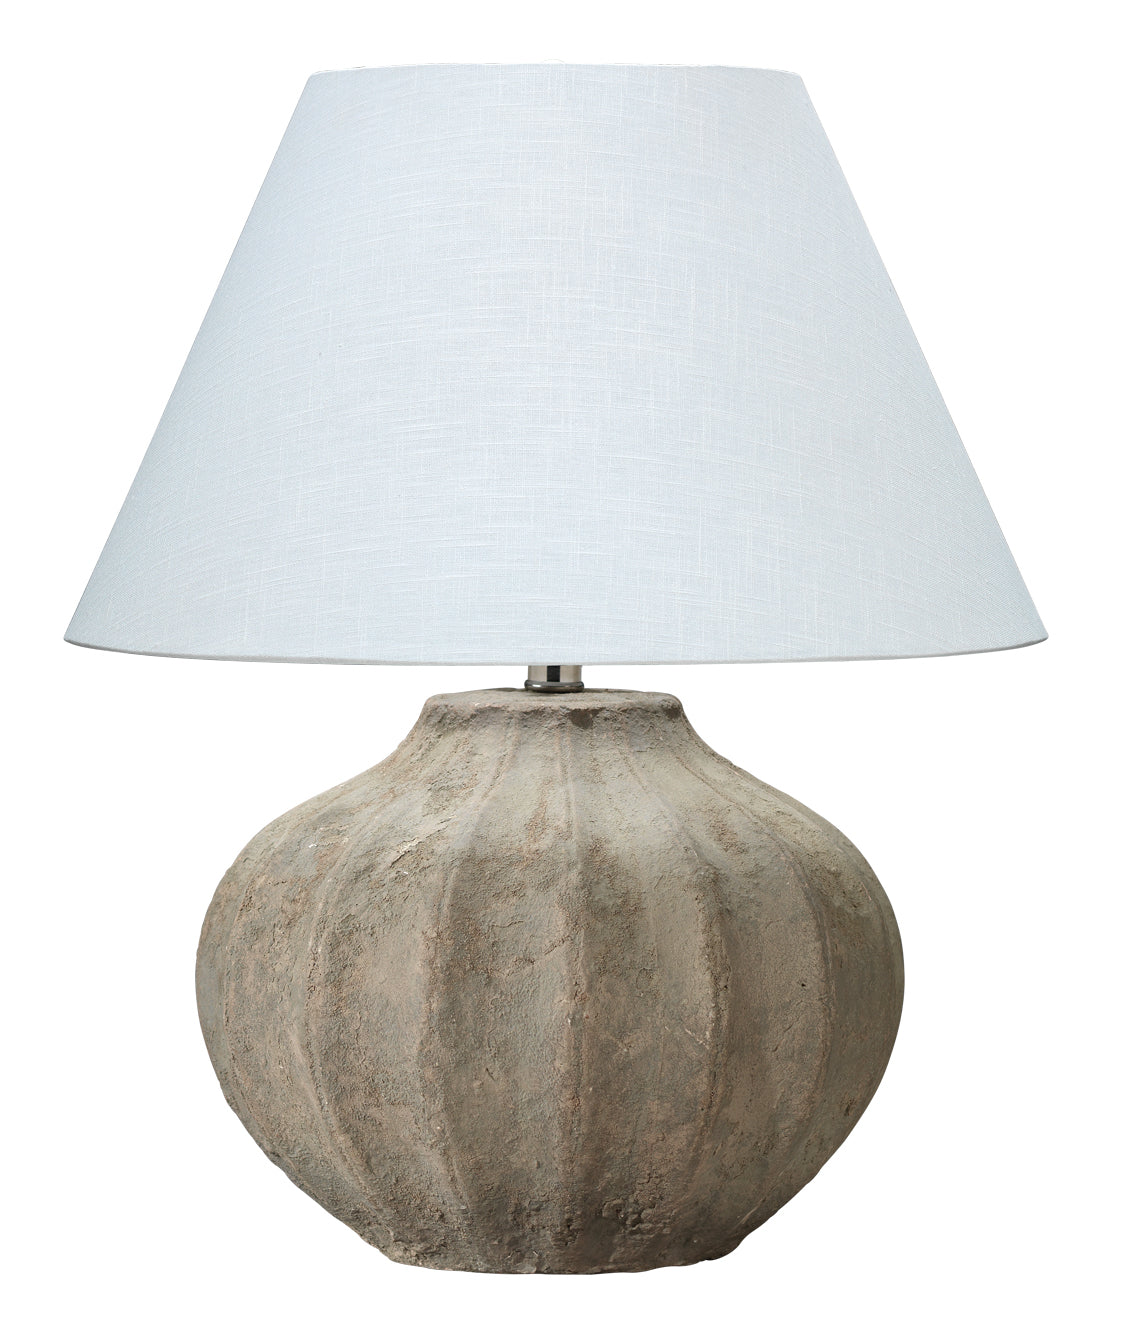 Clamshell Table Lamp in Sand Ceramic